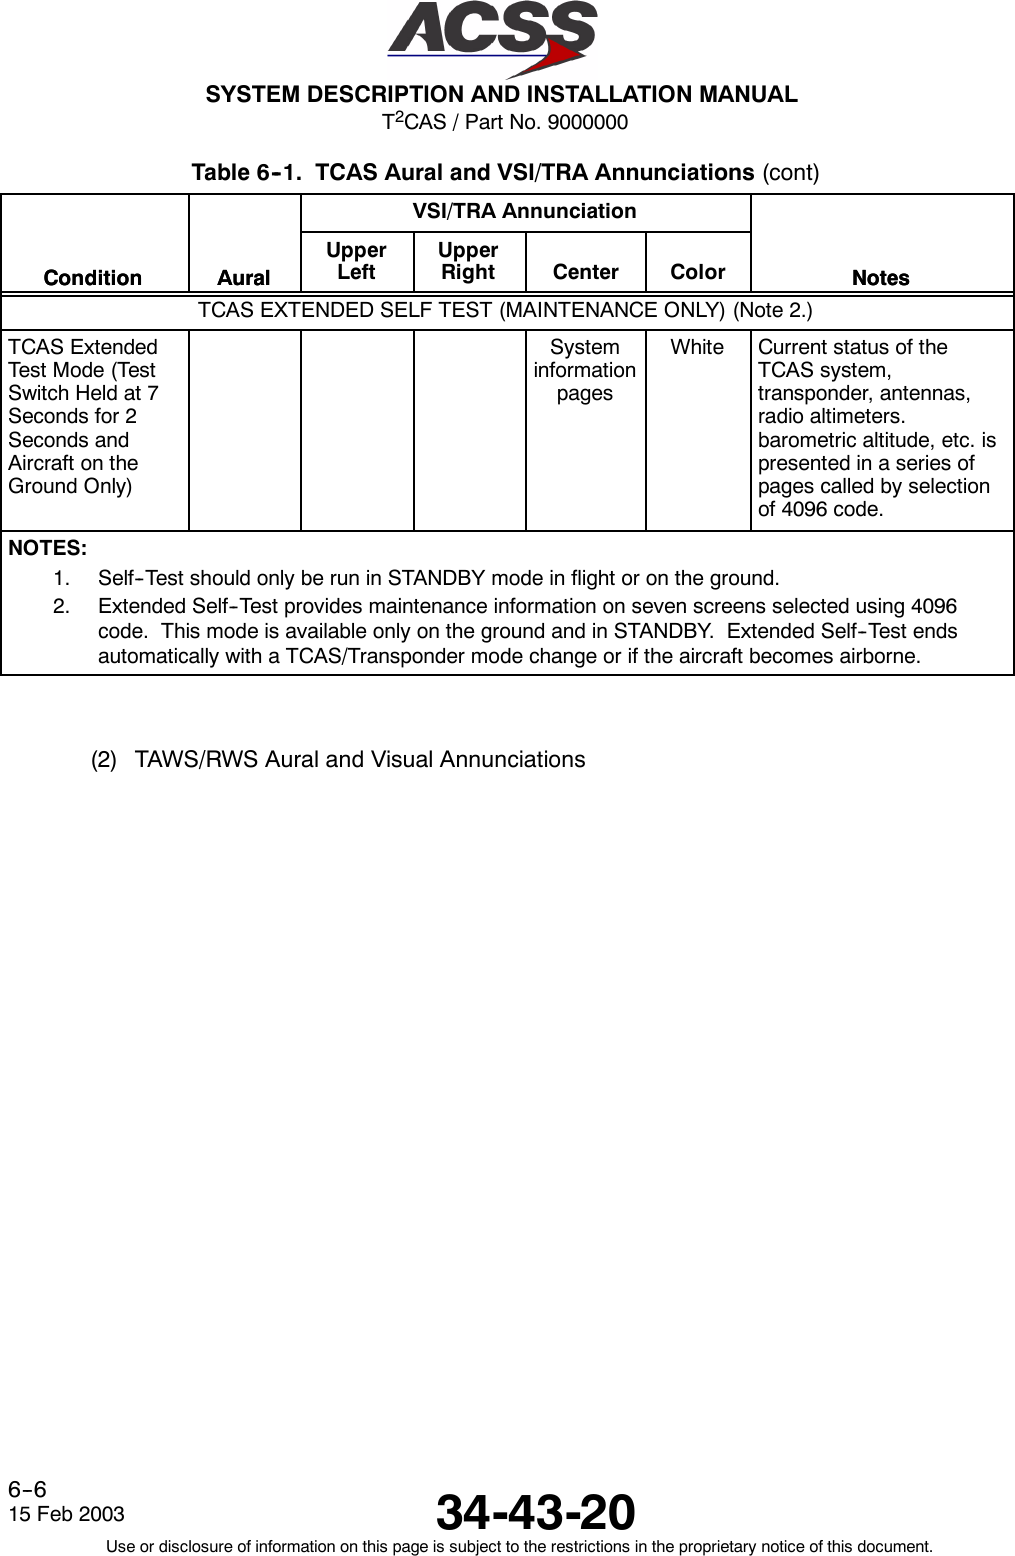 T2CAS / Part No. 9000000SYSTEM DESCRIPTION AND INSTALLATION MANUAL34-43-2015 Feb 2003Use or disclosure of information on this page is subject to the restrictions in the proprietary notice of this document.6--6Table 6--1. TCAS Aural and VSI/TRA Annunciations (cont)Condition NotesVSI/TRA AnnunciationAuralCondition NotesColorCenterUpperRightUpperLeftAuralTCAS EXTENDED SELF TEST (MAINTENANCE ONLY) (Note 2.)TCAS ExtendedTest Mode (TestSwitch Held at 7Seconds for 2Seconds andAircraft on theGround Only)SysteminformationpagesWhite Current status of theTCAS system,transponder, antennas,radio altimeters.barometric altitude, etc. ispresented in a series ofpages called by selectionof 4096 code.NOTES:1. Self--Test should only be run in STANDBY mode in flight or on the ground.2. Extended Self--Test provides maintenance information on seven screens selected using 4096code. This mode is available only on the ground and in STANDBY. Extended Self--Test endsautomatically with a TCAS/Transponder mode change or if the aircraft becomes airborne.(2) TAWS/RWS Aural and Visual Annunciations